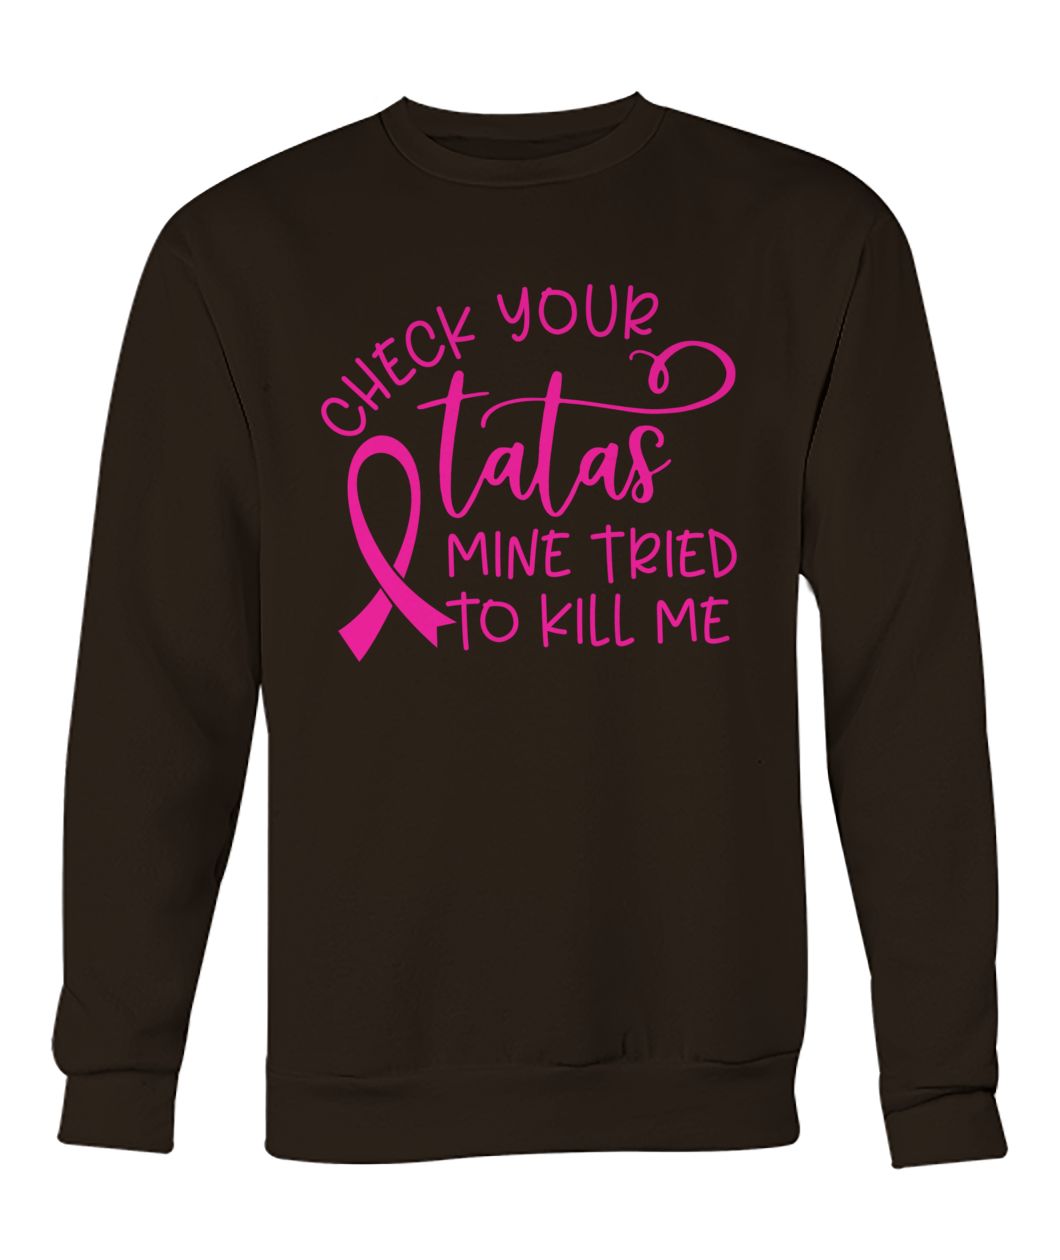 Breast cancer check your tatas mine tried to kill me crew neck sweatshirt